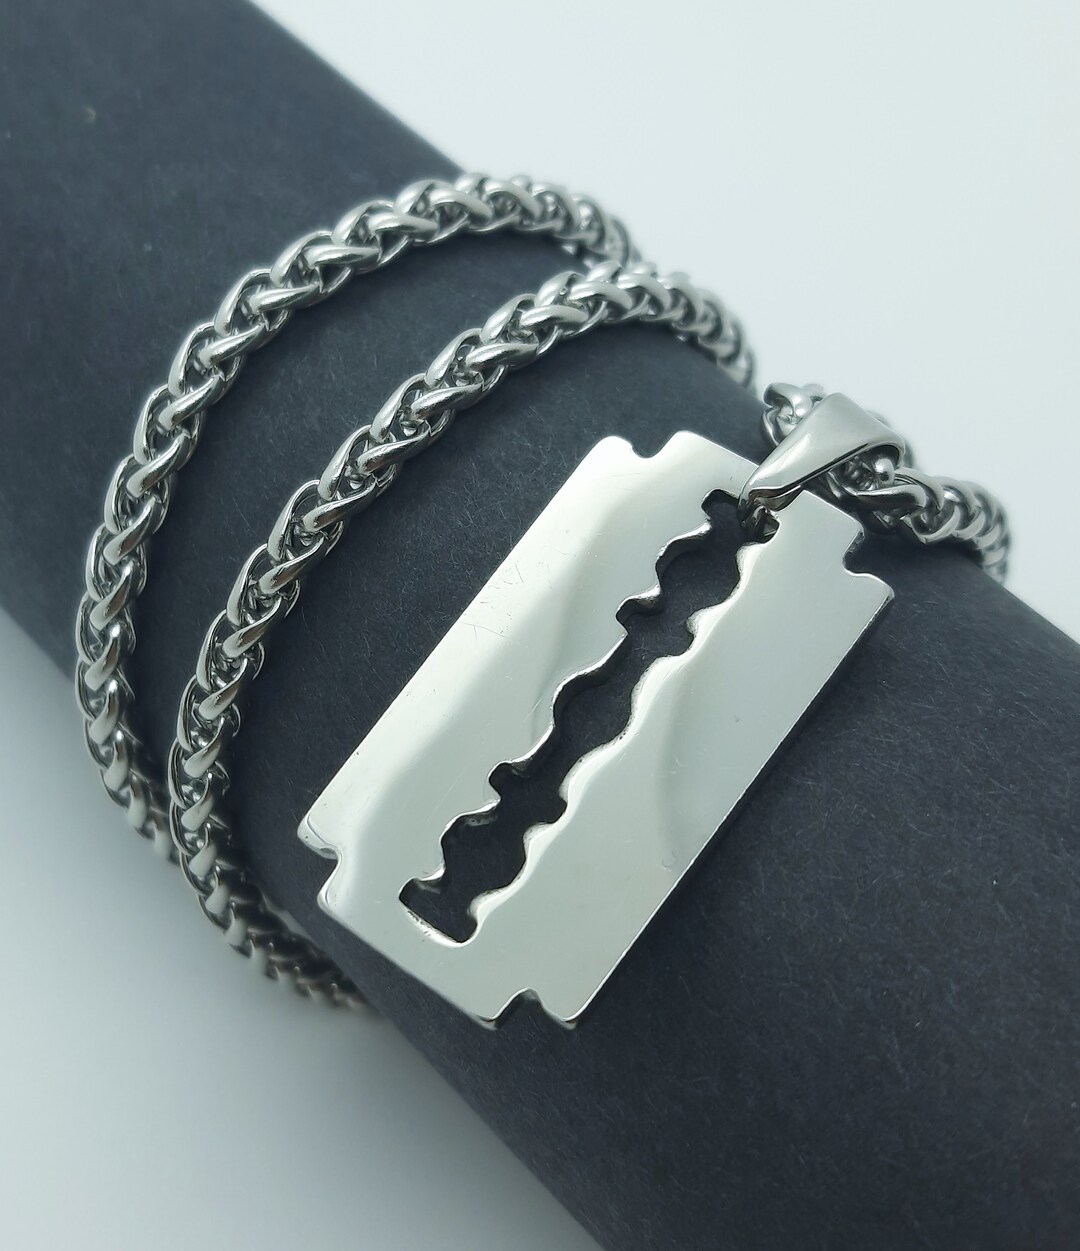 RazOrblade Love neckLace online July 31st!! 100% Aged StainLess